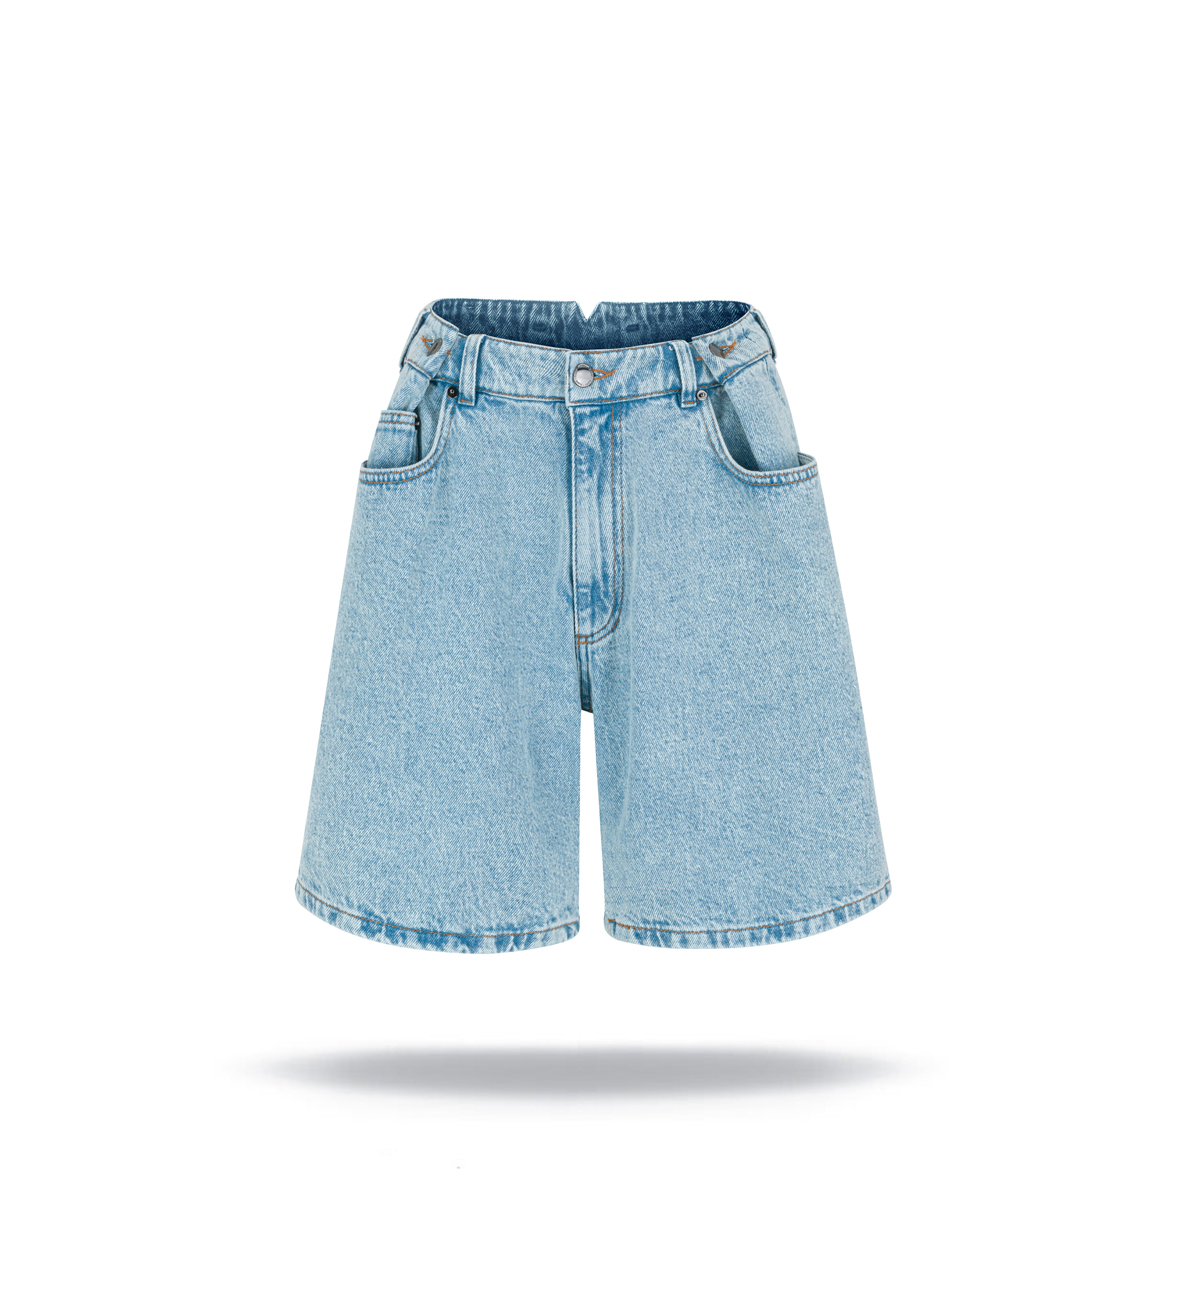 Denim shorts mid-rise with loose leg; front and back pockets, light washed denim.